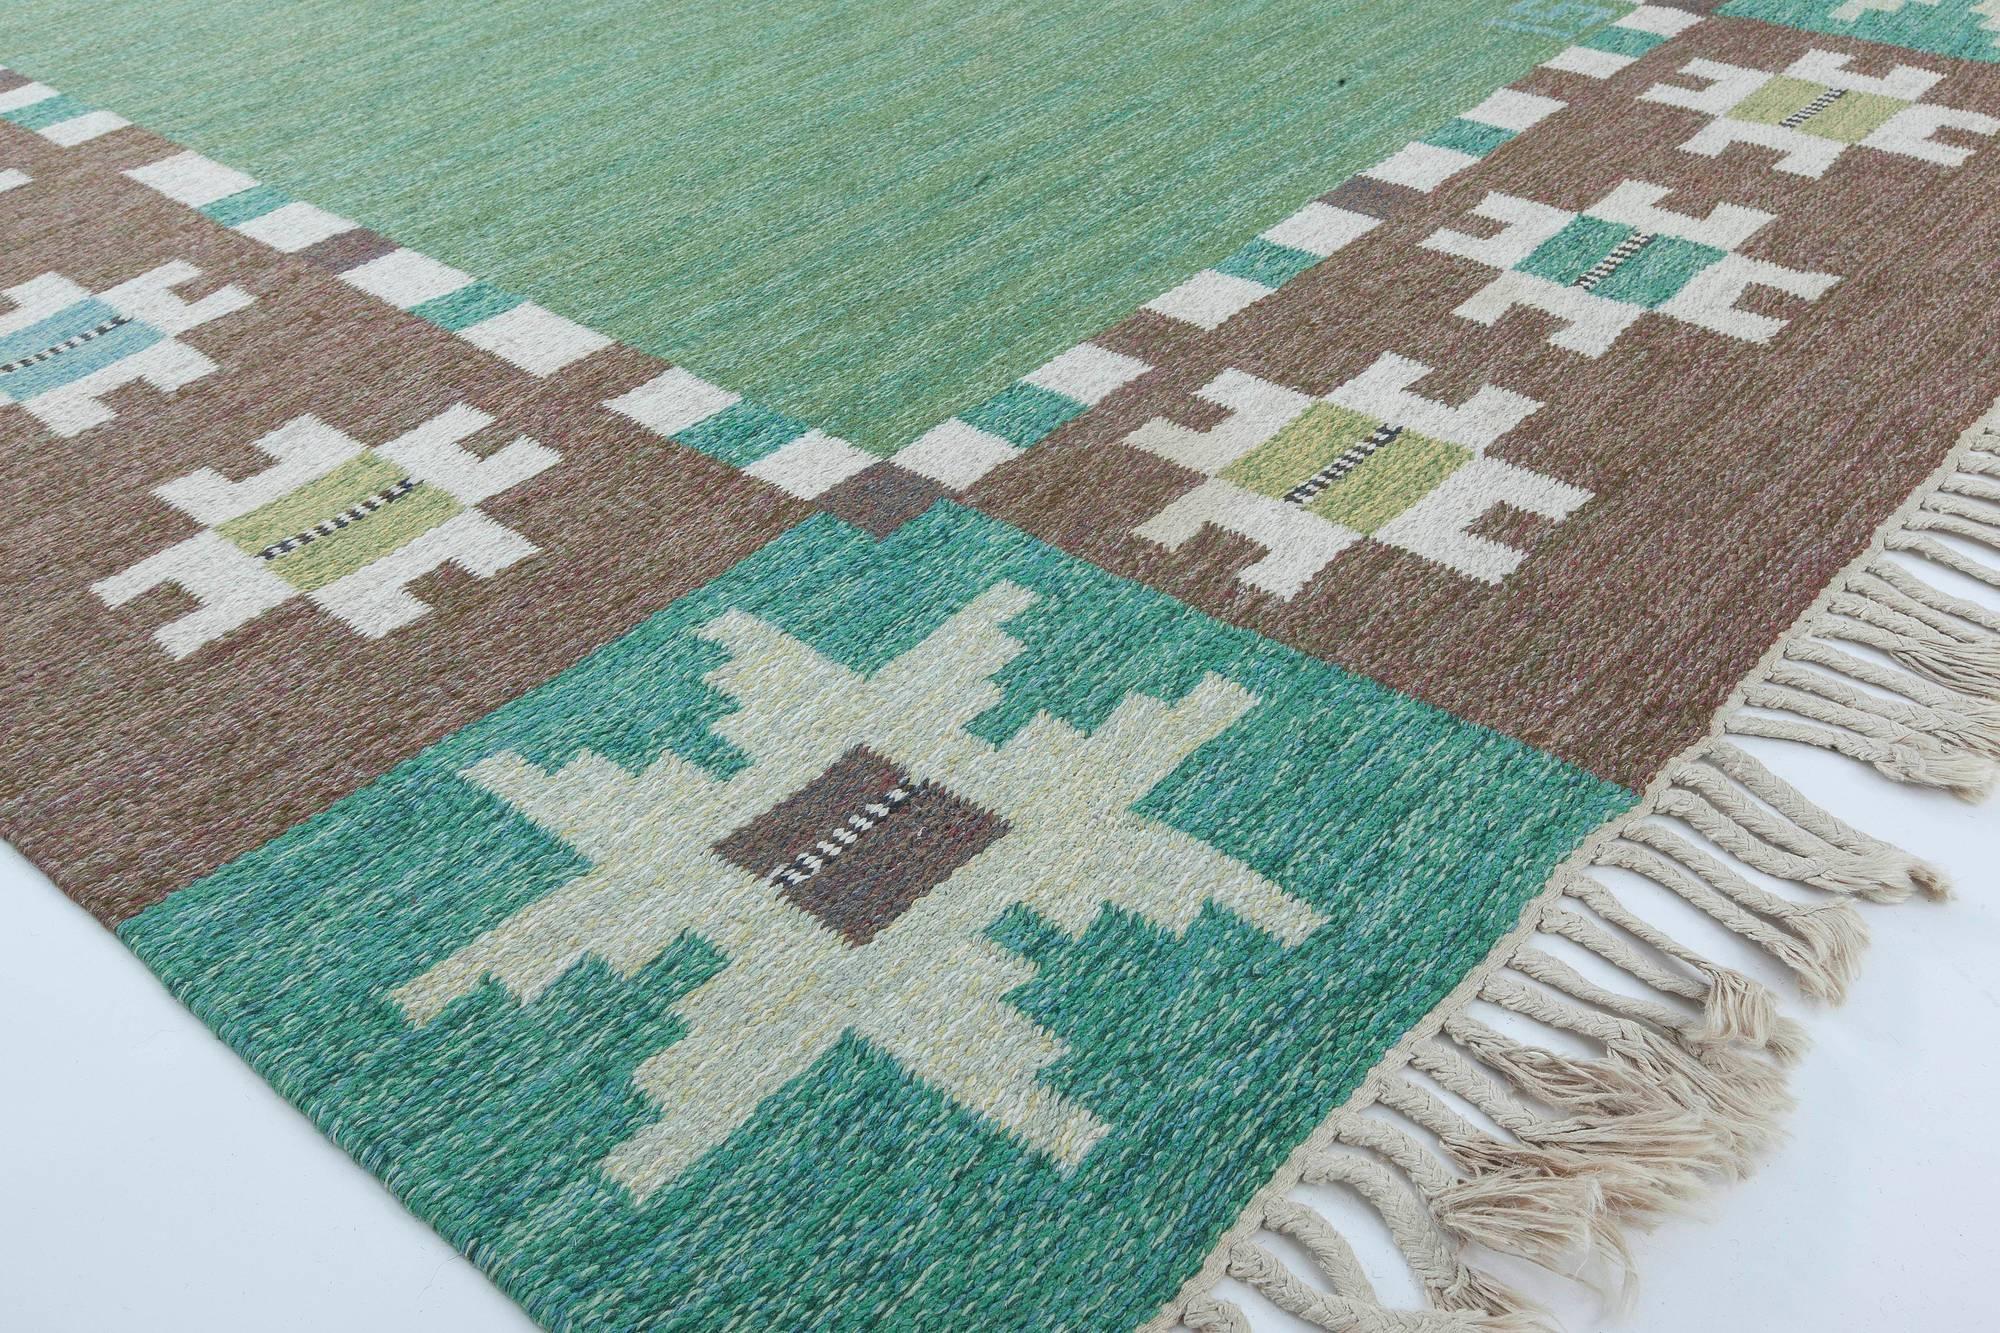 Mid-20th century Swedish garden design rug by Ingegerd Silow in green, brown, and ivory. Woven signature 'IS'
Size: 5'4